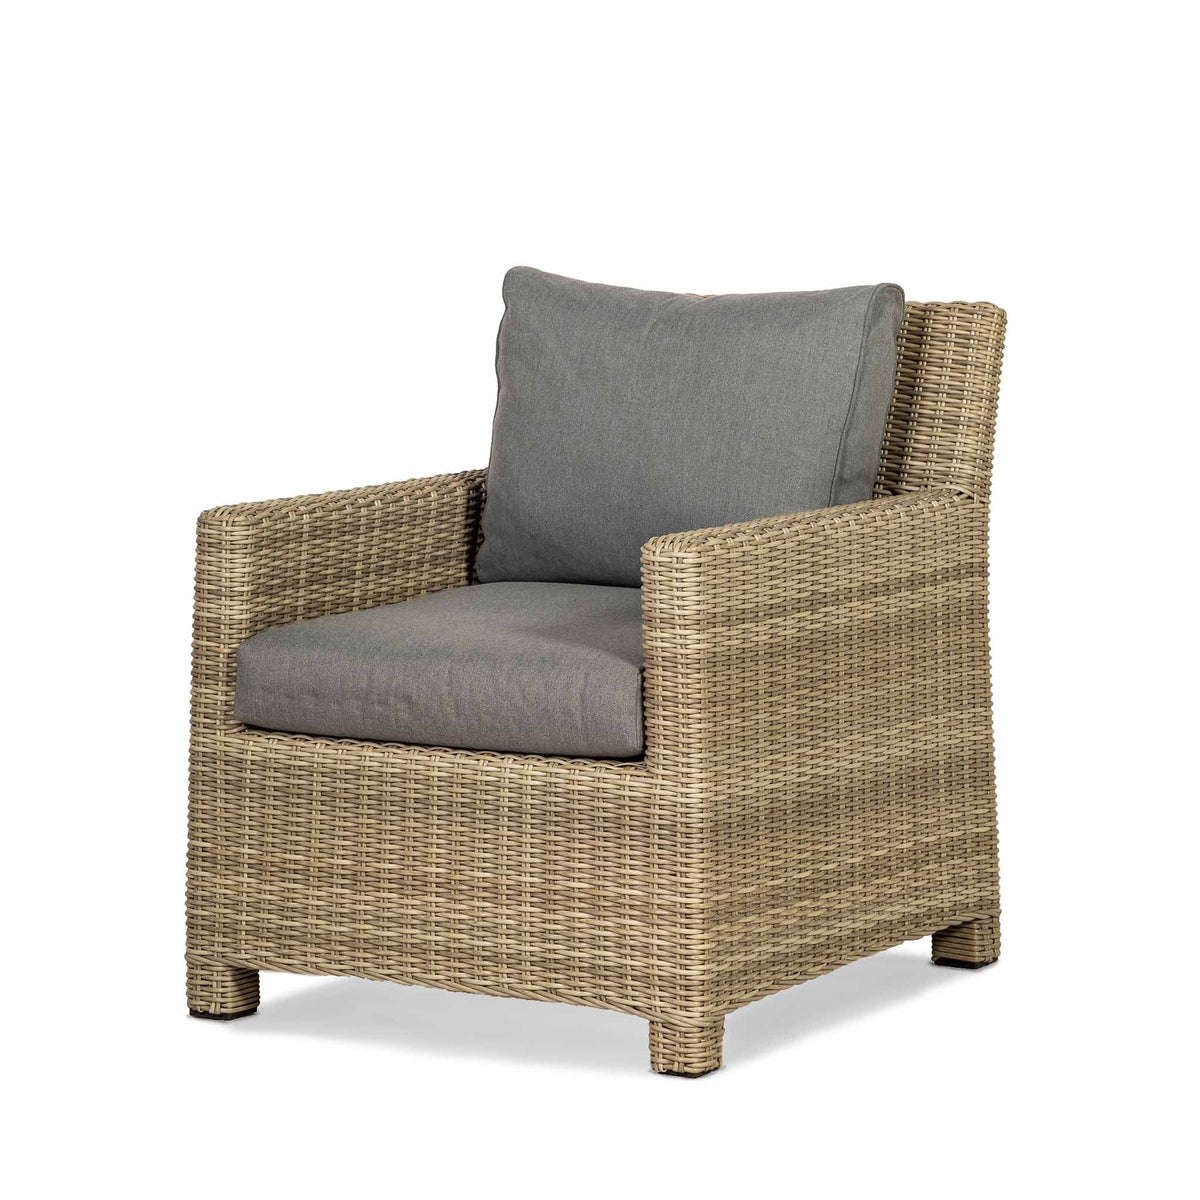 Wentworth Deluxe Rattan Sofa Garden Lounge Set with Adjustable Table - Close up Side view of Chair